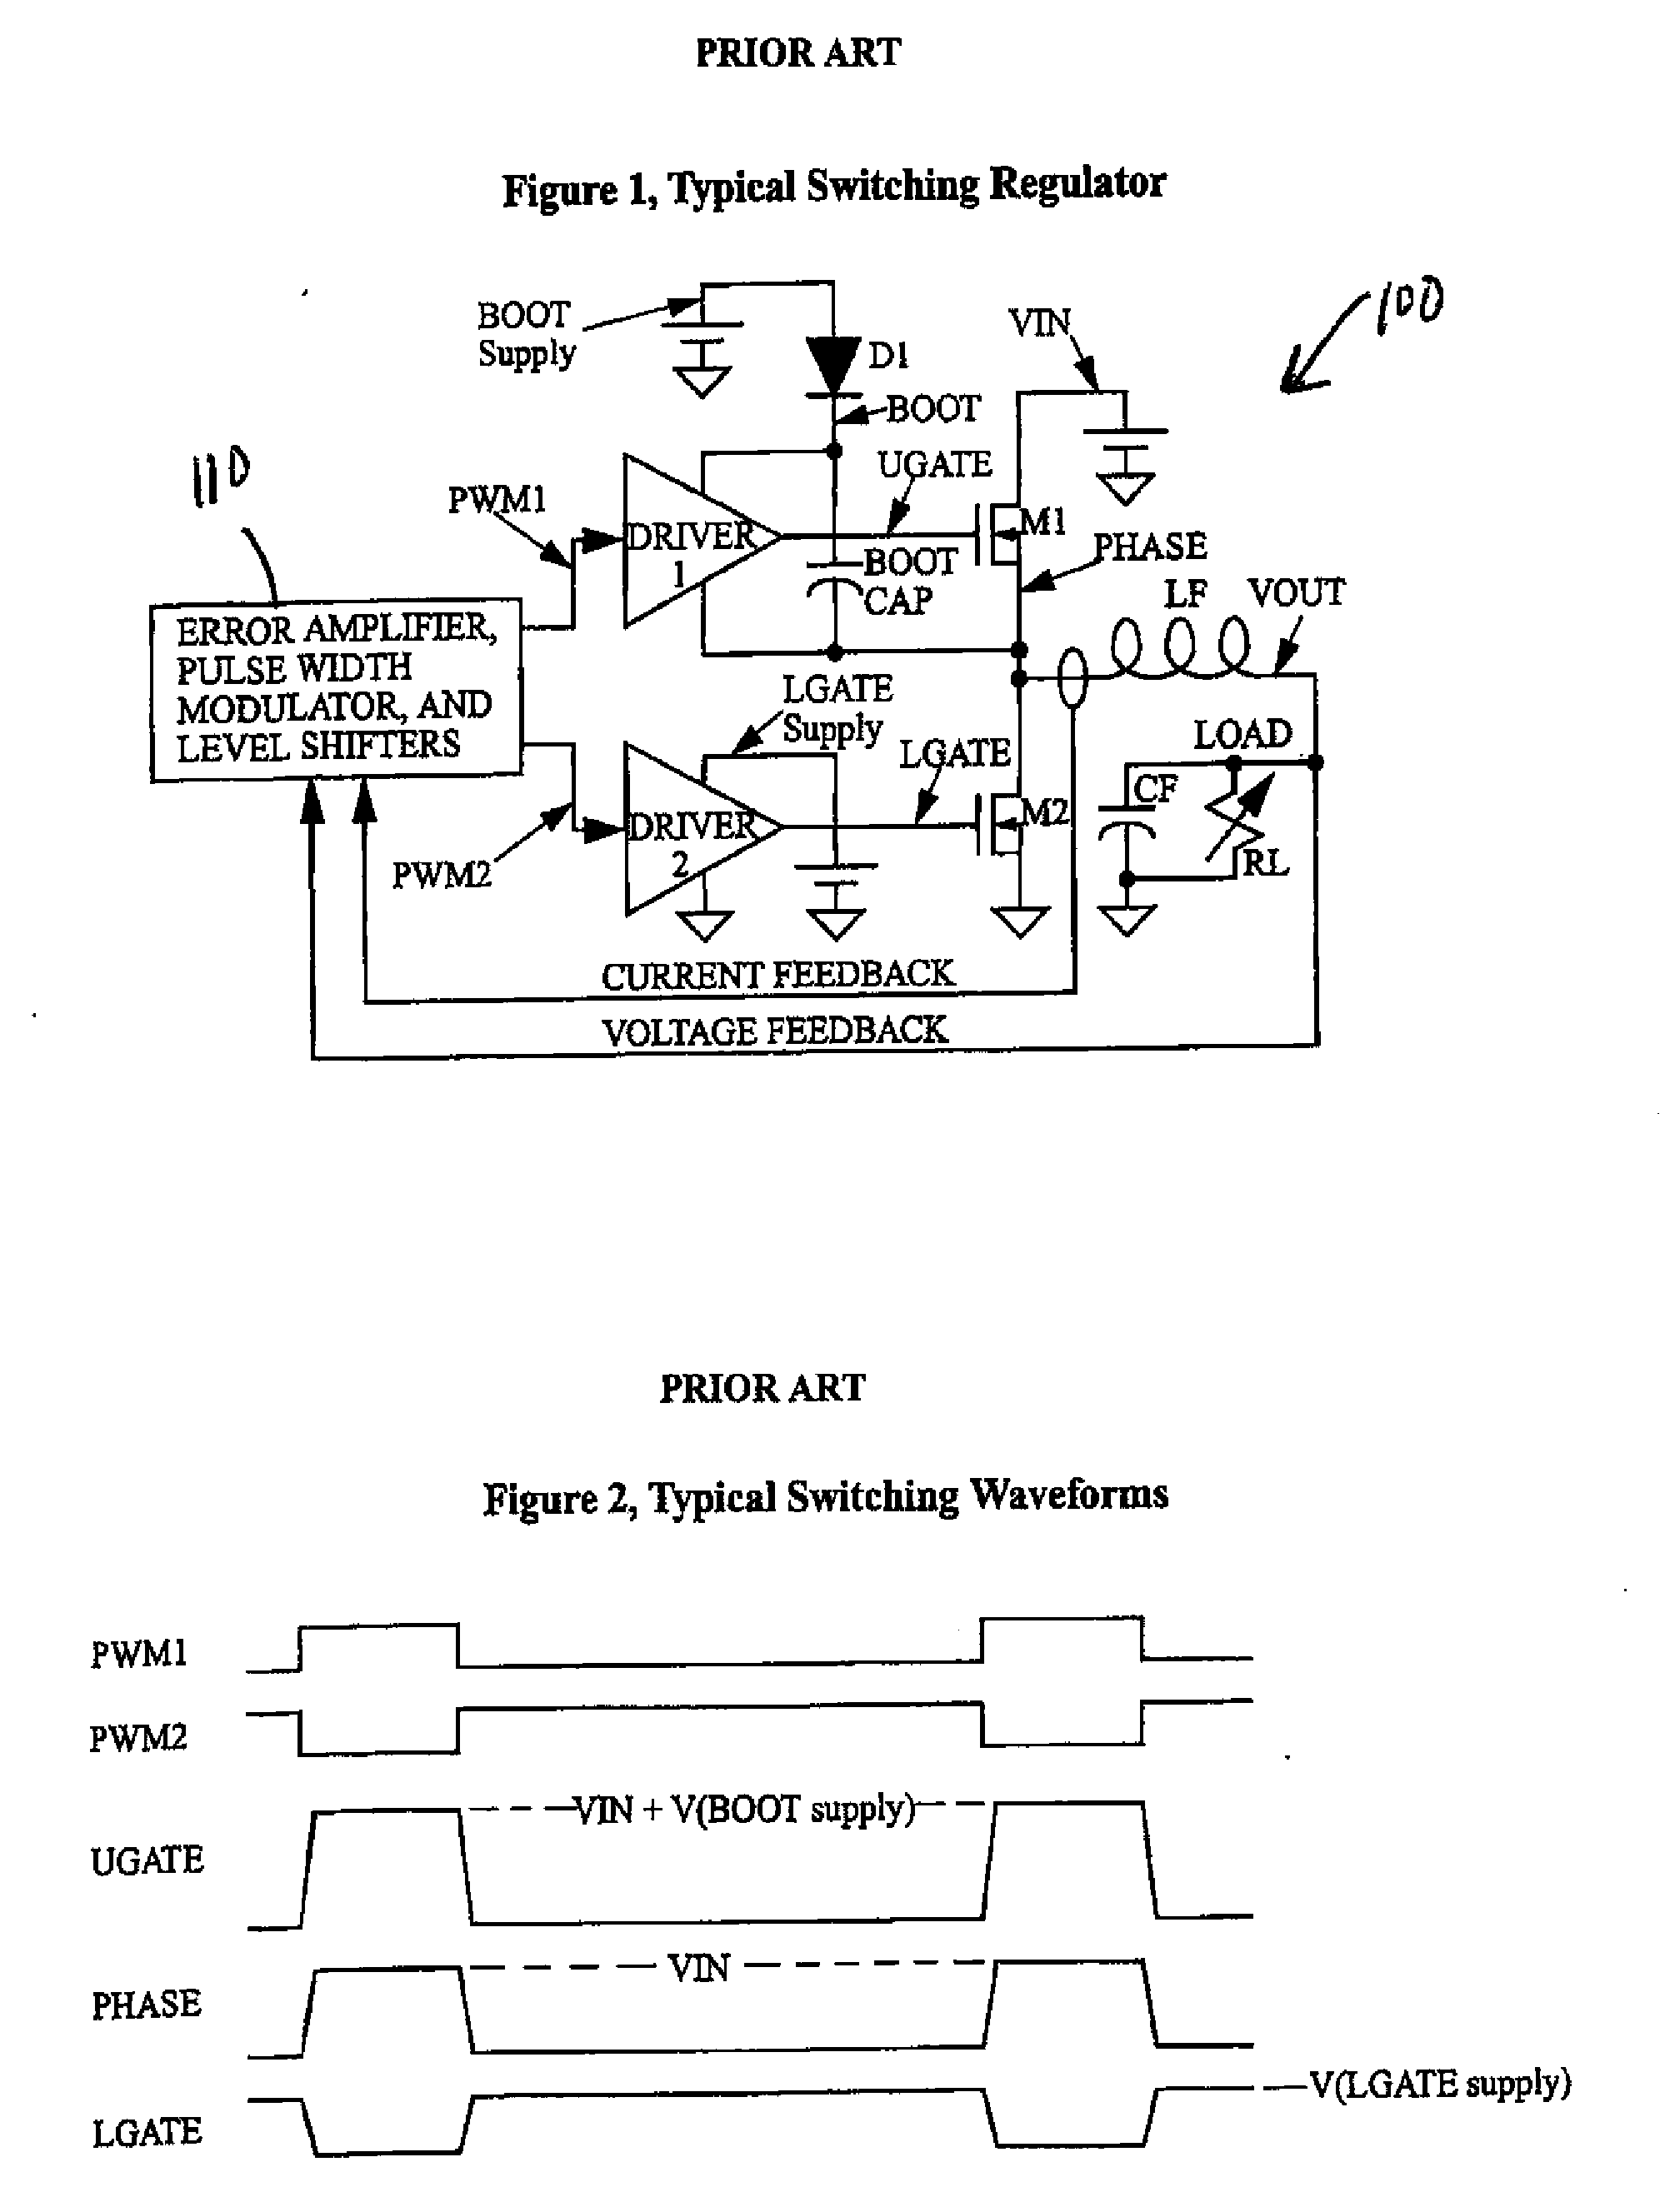 Load compensated switching regulator